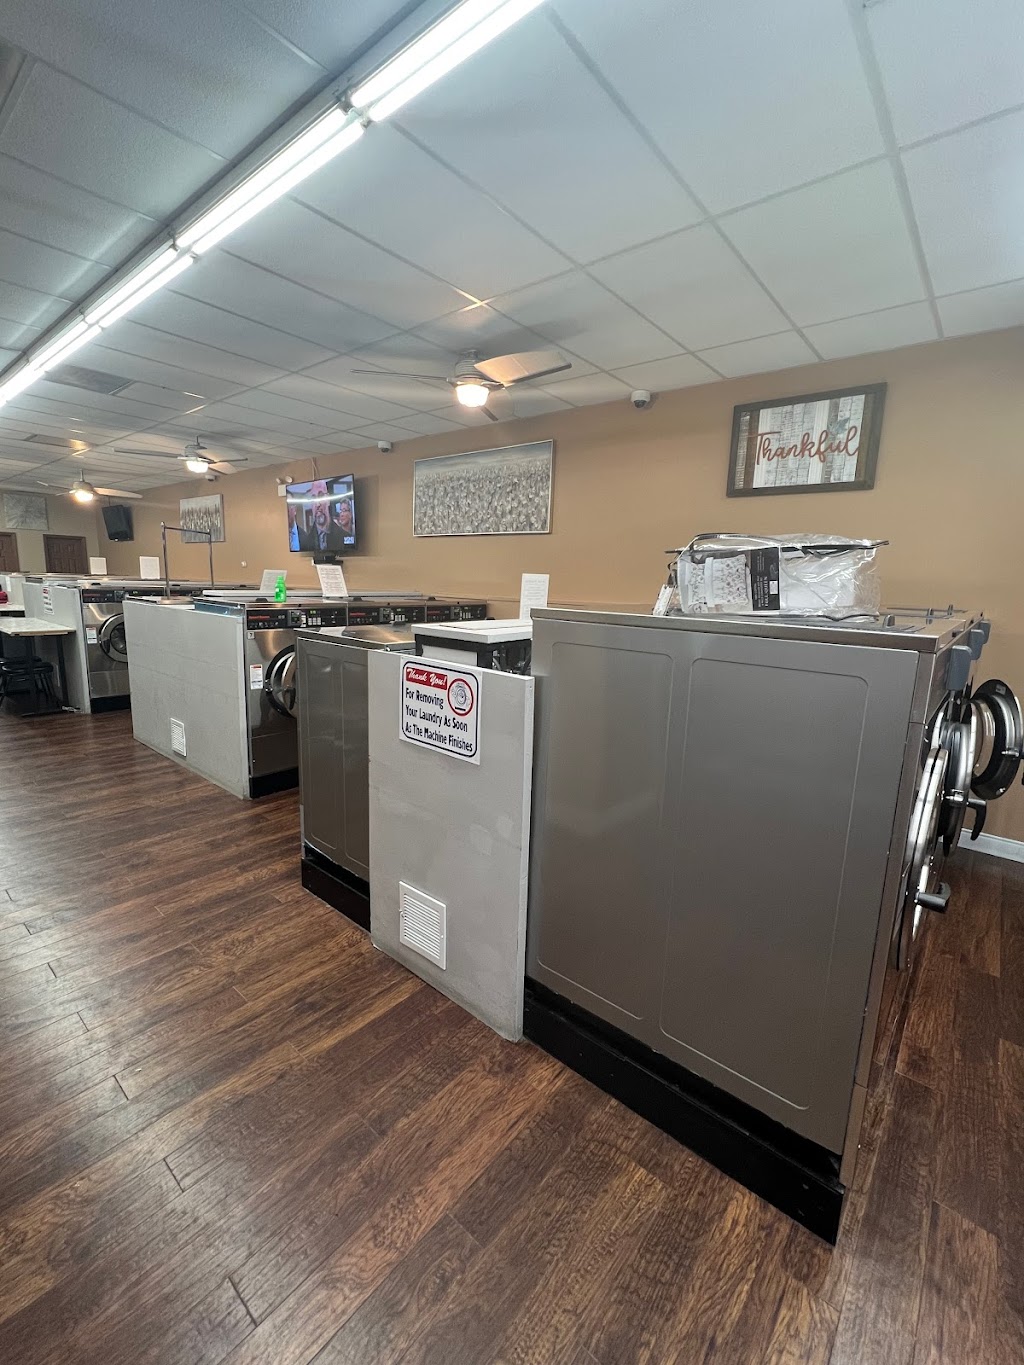 Kingsport Coin Laundry | 923 S Roselle Rd, Schaumburg, IL 60193 | Phone: (630) 283-5921